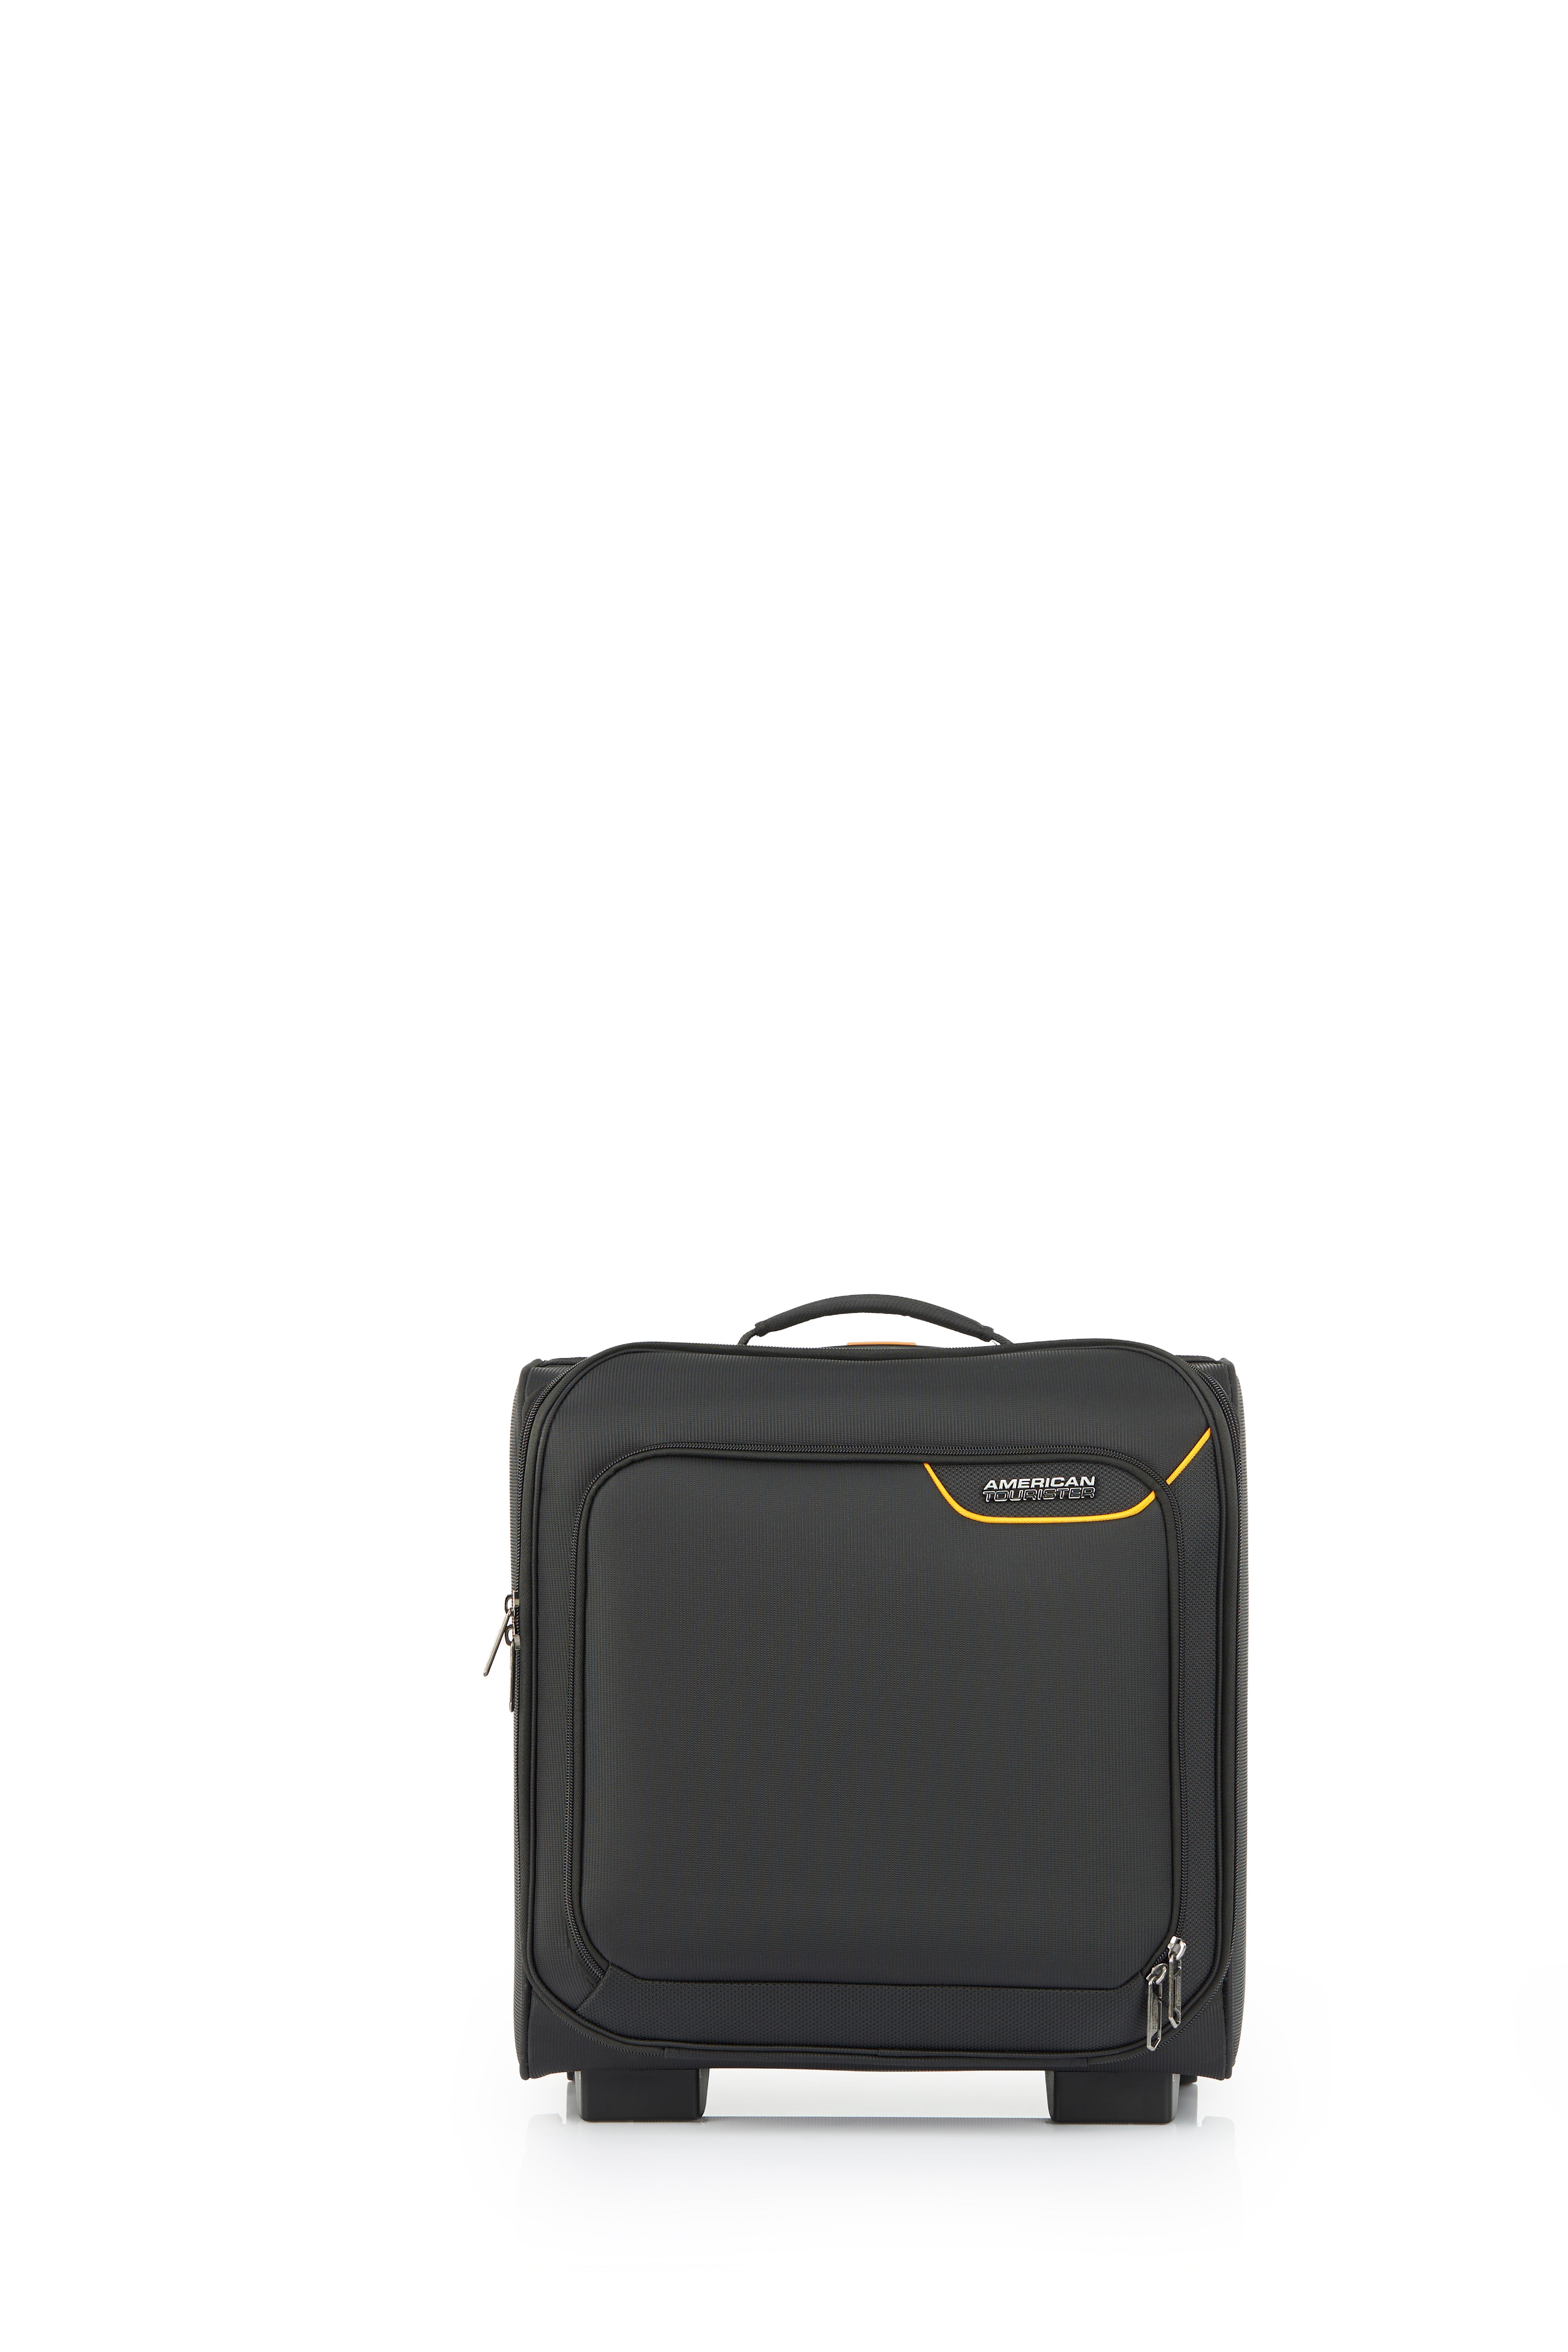 American Tourister - Applite ECO Underseater Suitcase - Black/Must-2